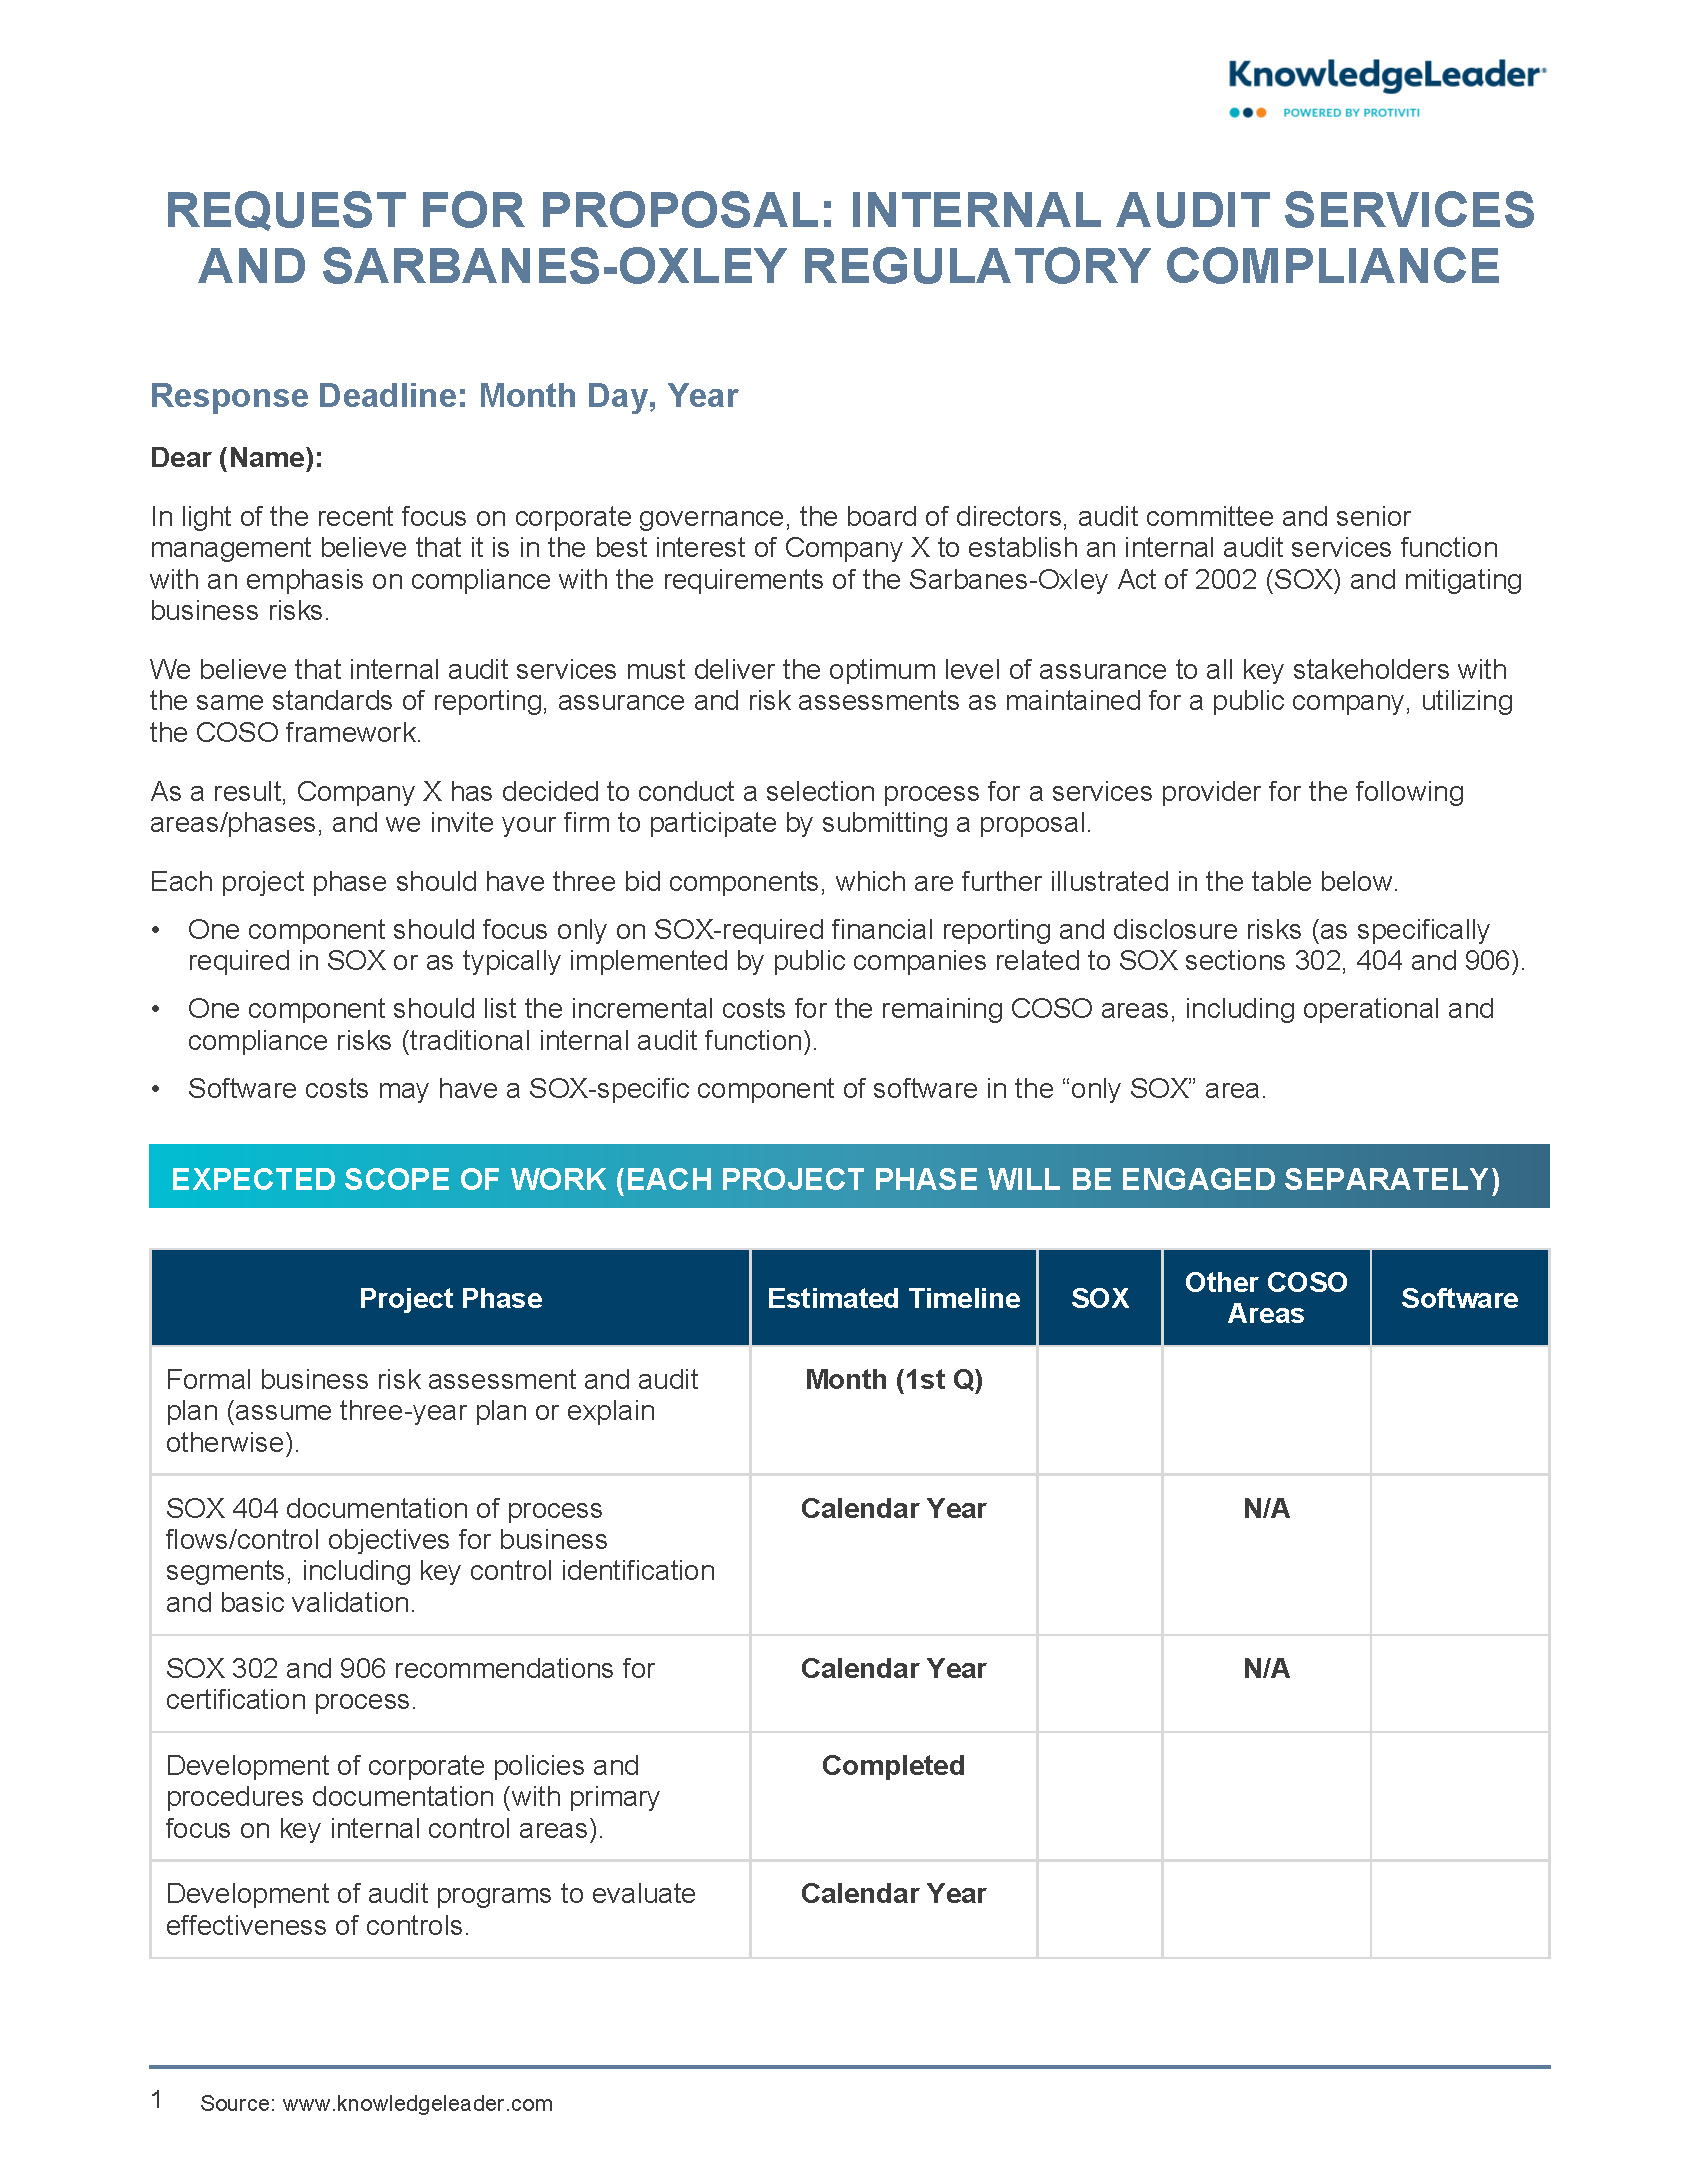 RFP - Internal Audit Services and Sarbanes-Oxley Regulatory Compliance